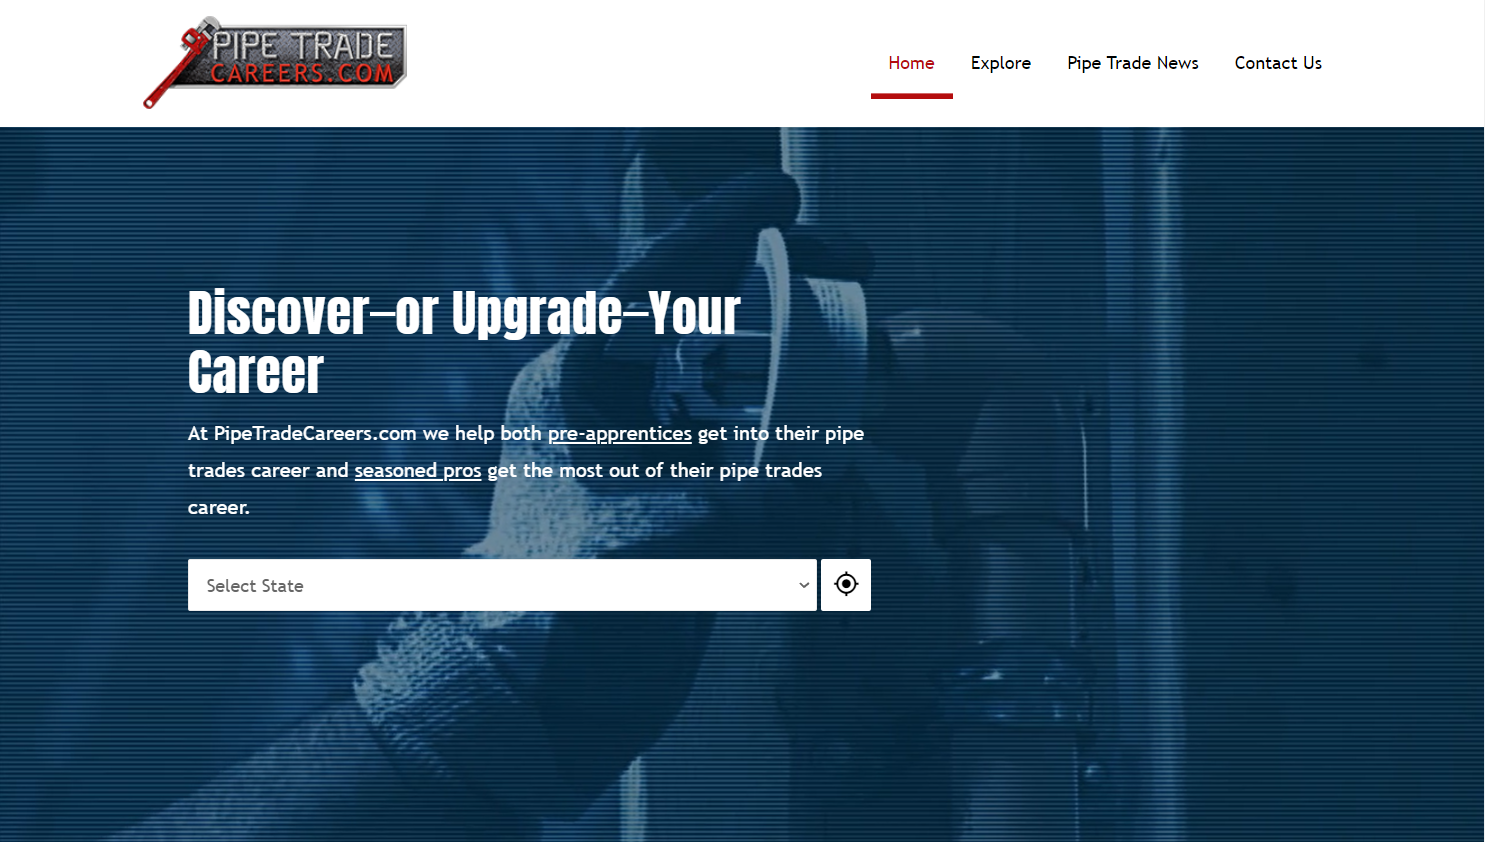 Regsiter in the Pipetrades Career Portal